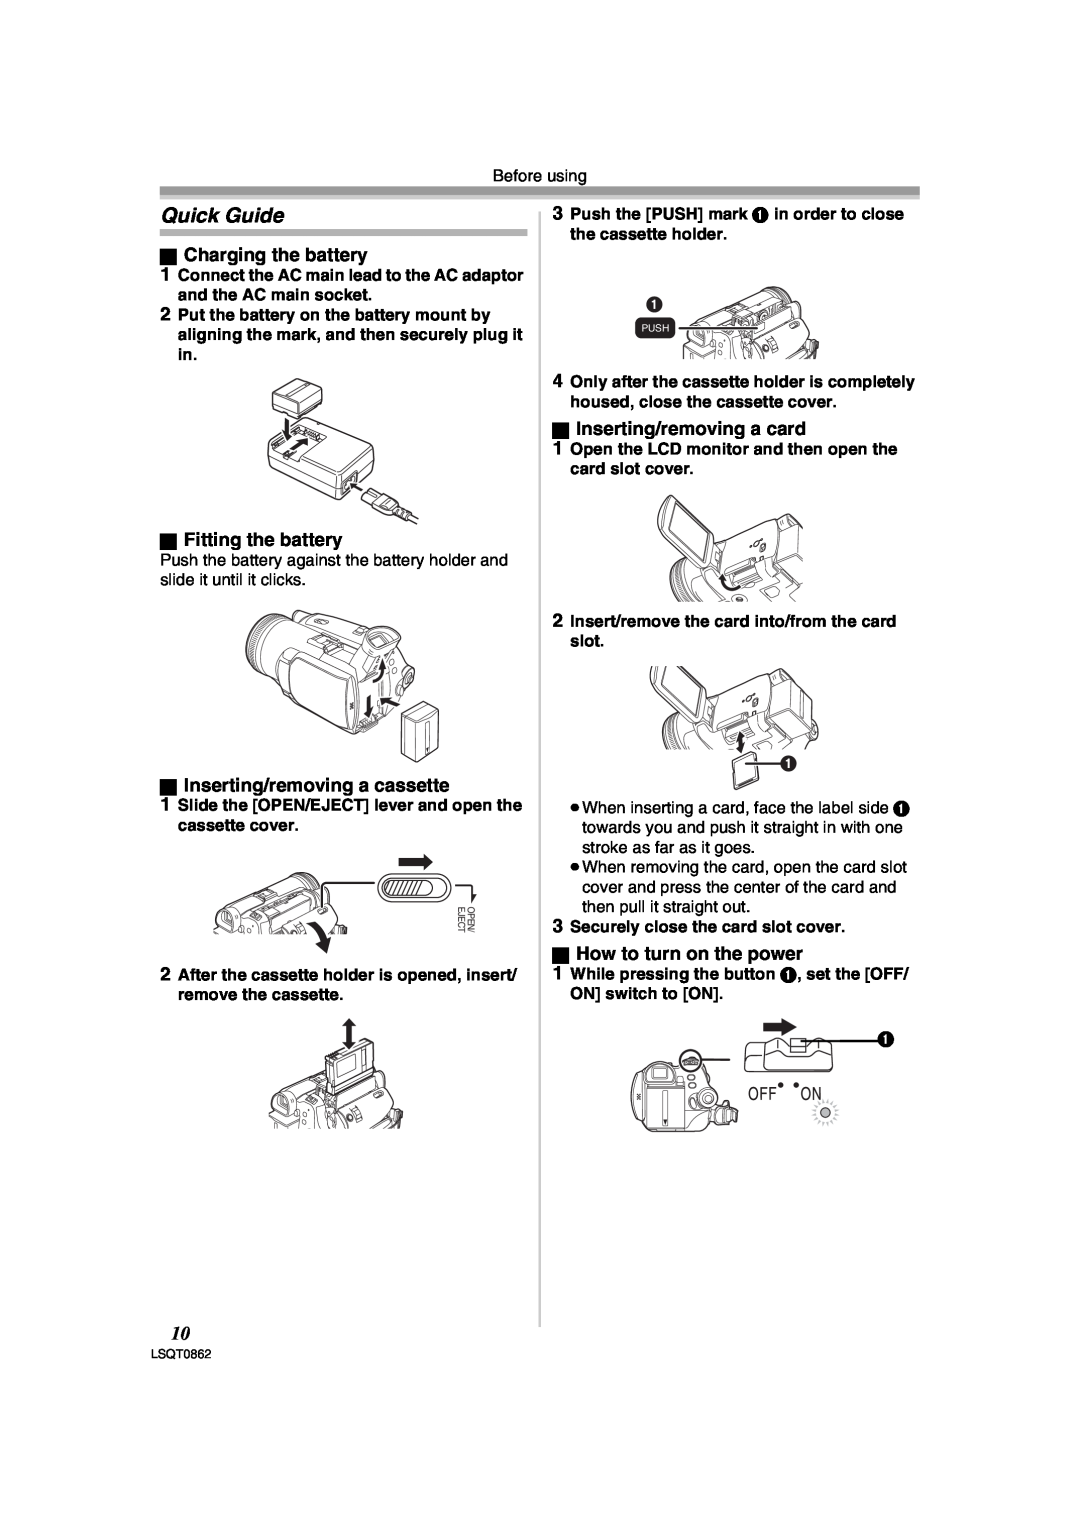 Panasonic PV-GS250 Quick Guide, ª Charging the battery, ª Fitting the battery, ª Inserting/removing a cassette 